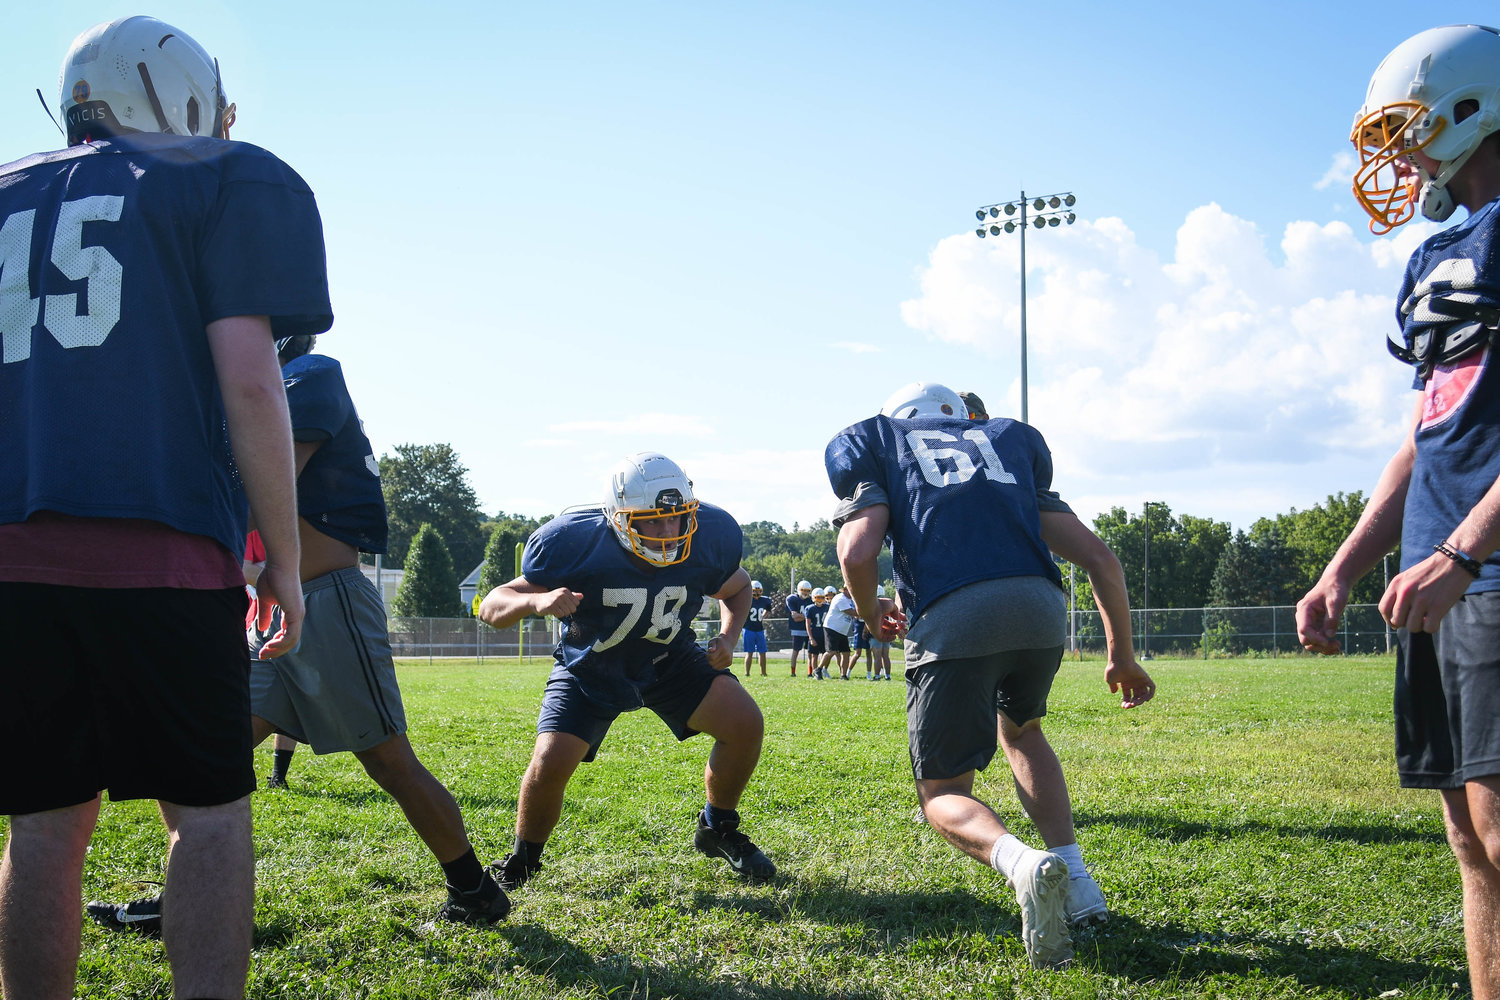 Central Valley Academy junior offensive lineman/defensive lineman Salvatore Fresco prepares to block a teammate during an afternoon practice on Aug. 24 in Ilion.